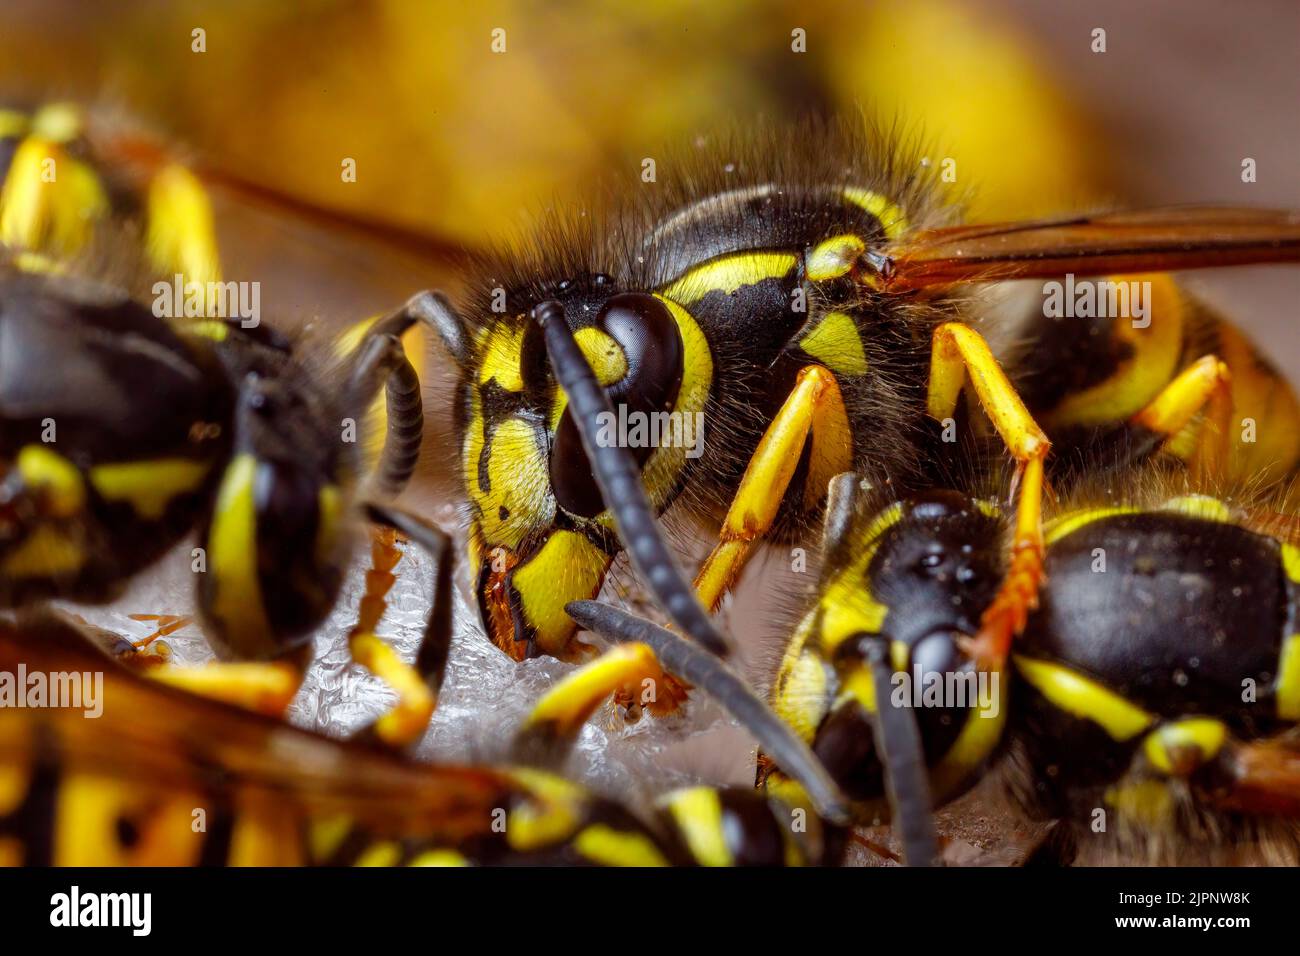 A dangerous Wasp on food Stock Photo